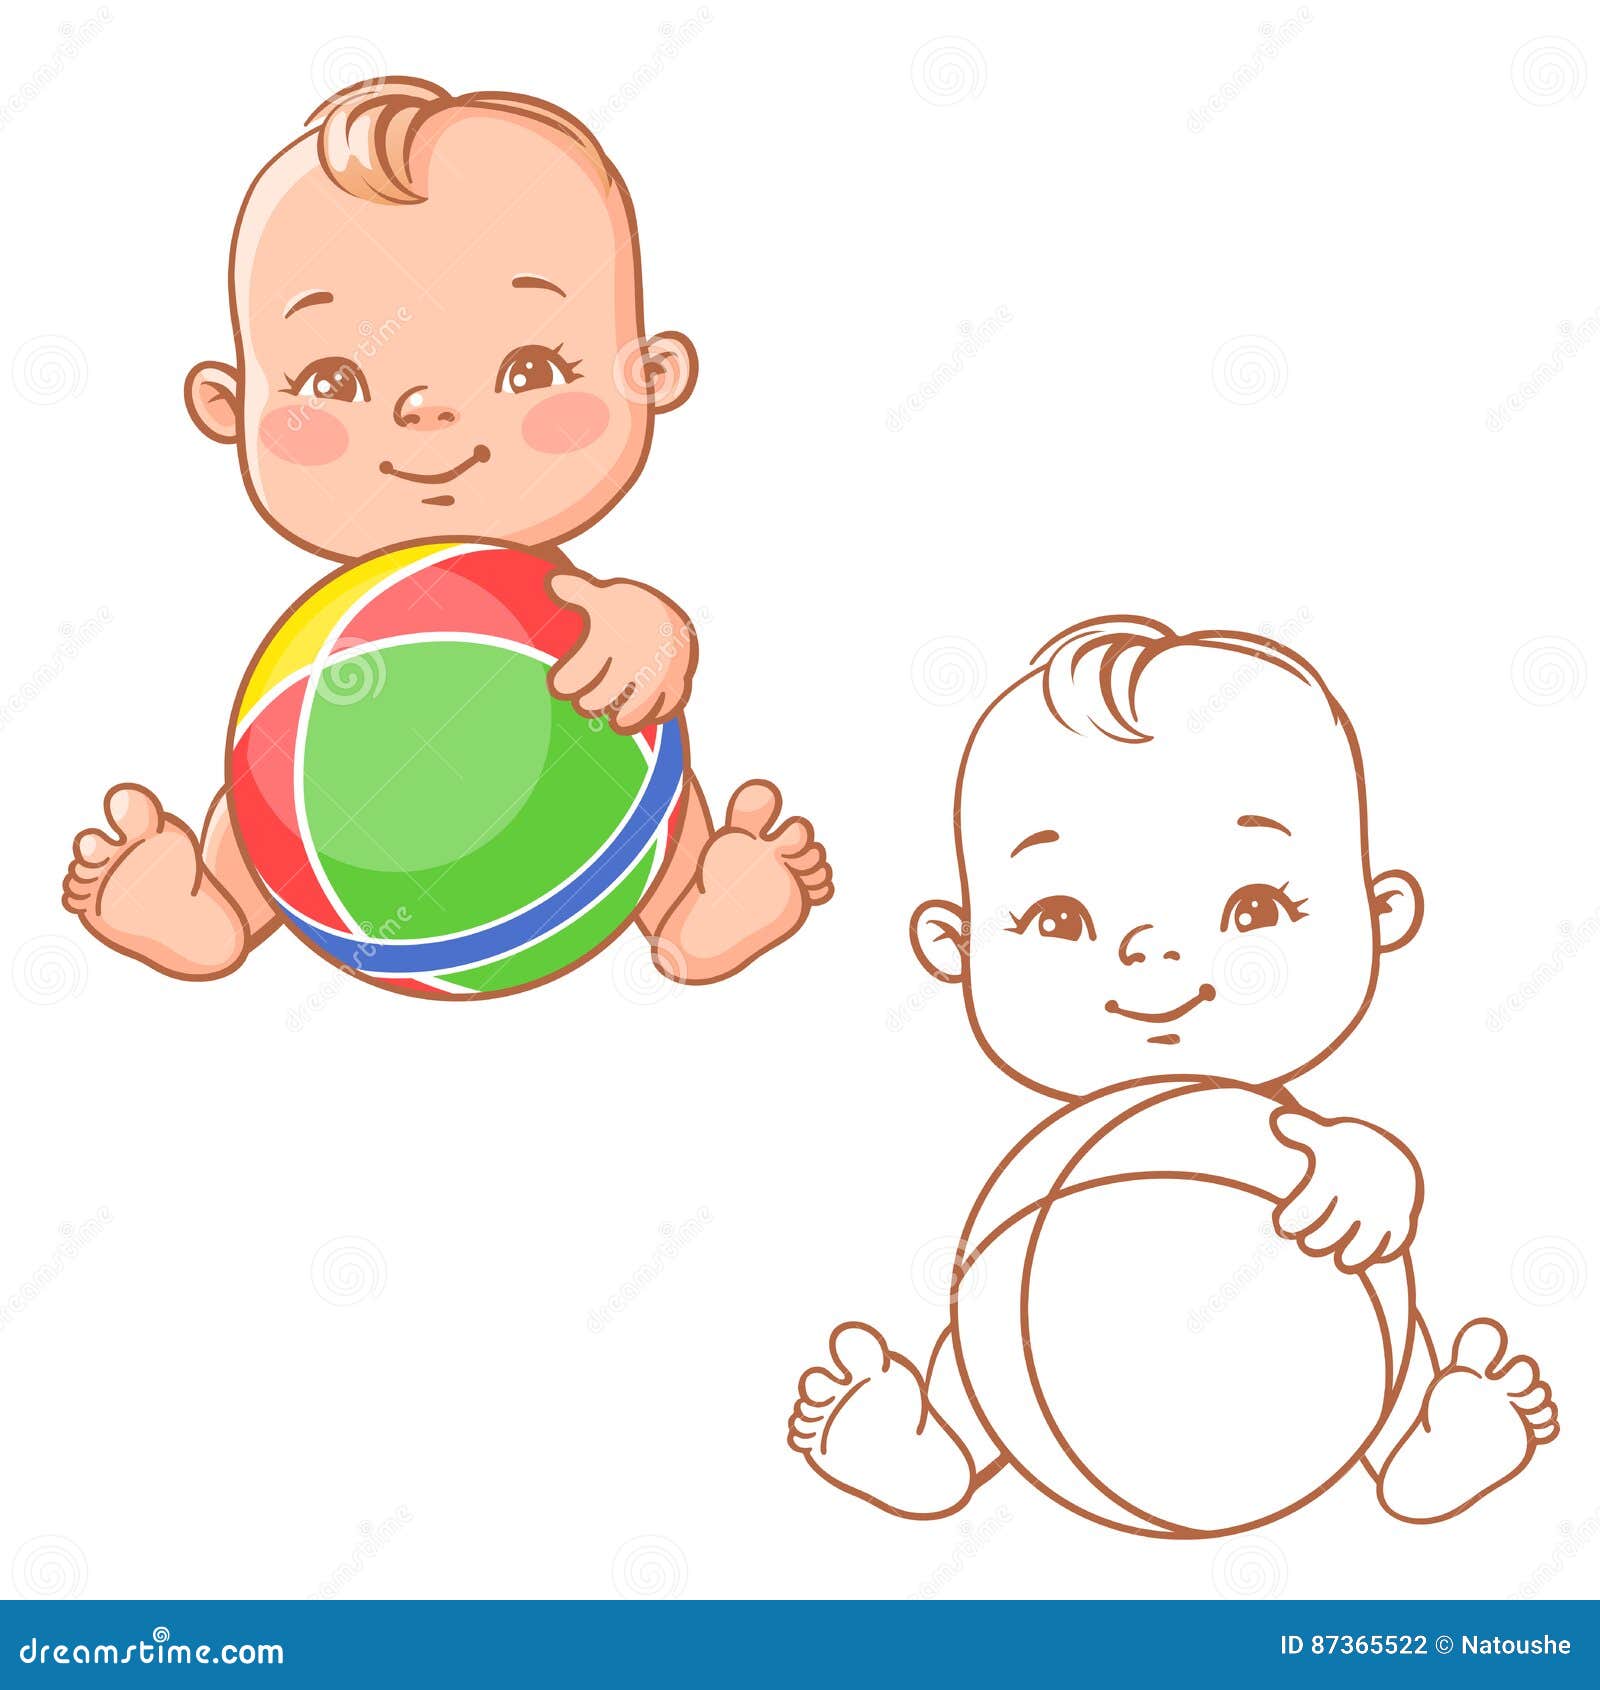 Baby play with ball stock vector. Illustration of piccolo - 87365522